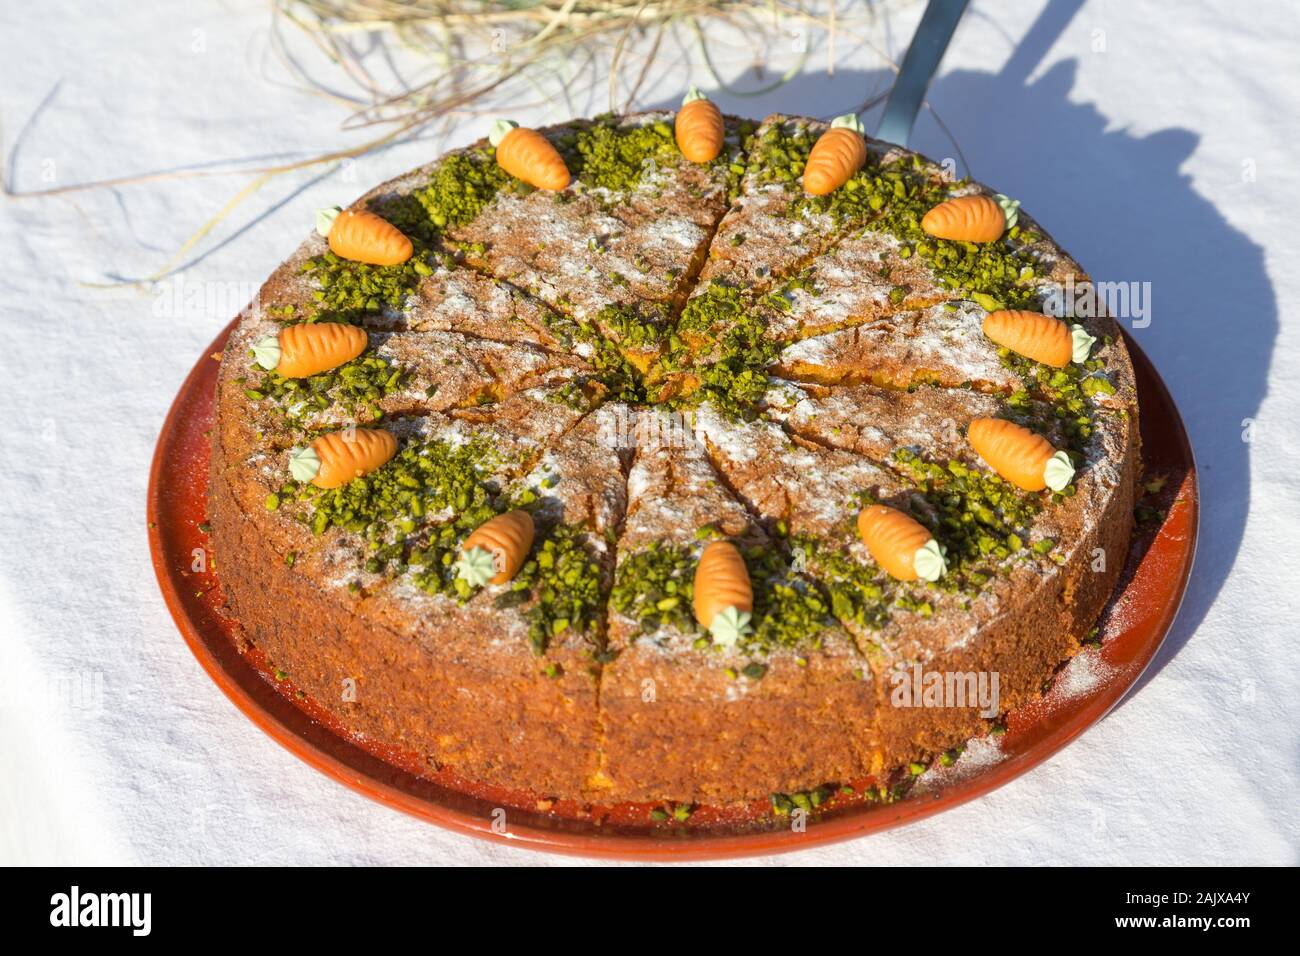 carrot cake on a table with white tablecloth Stock Photo